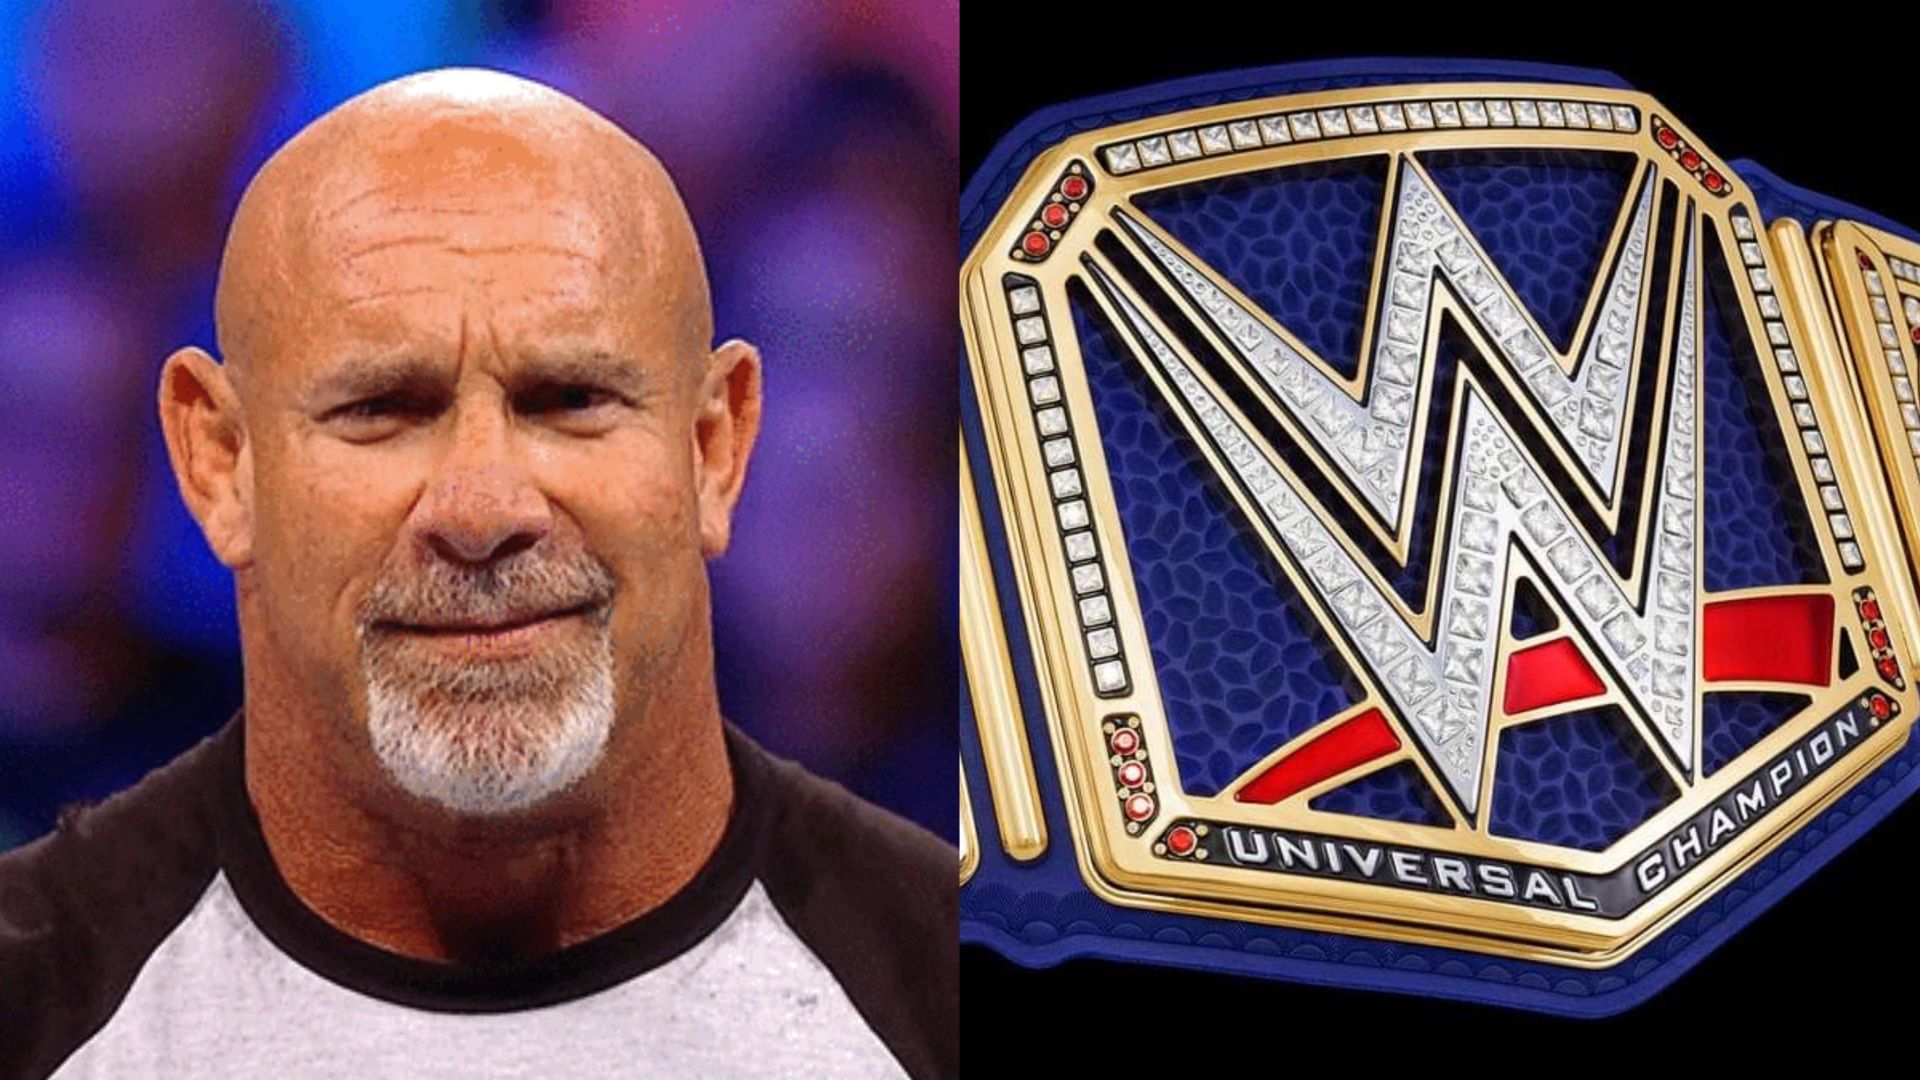 Goldberg has always been a divisive character in WWE